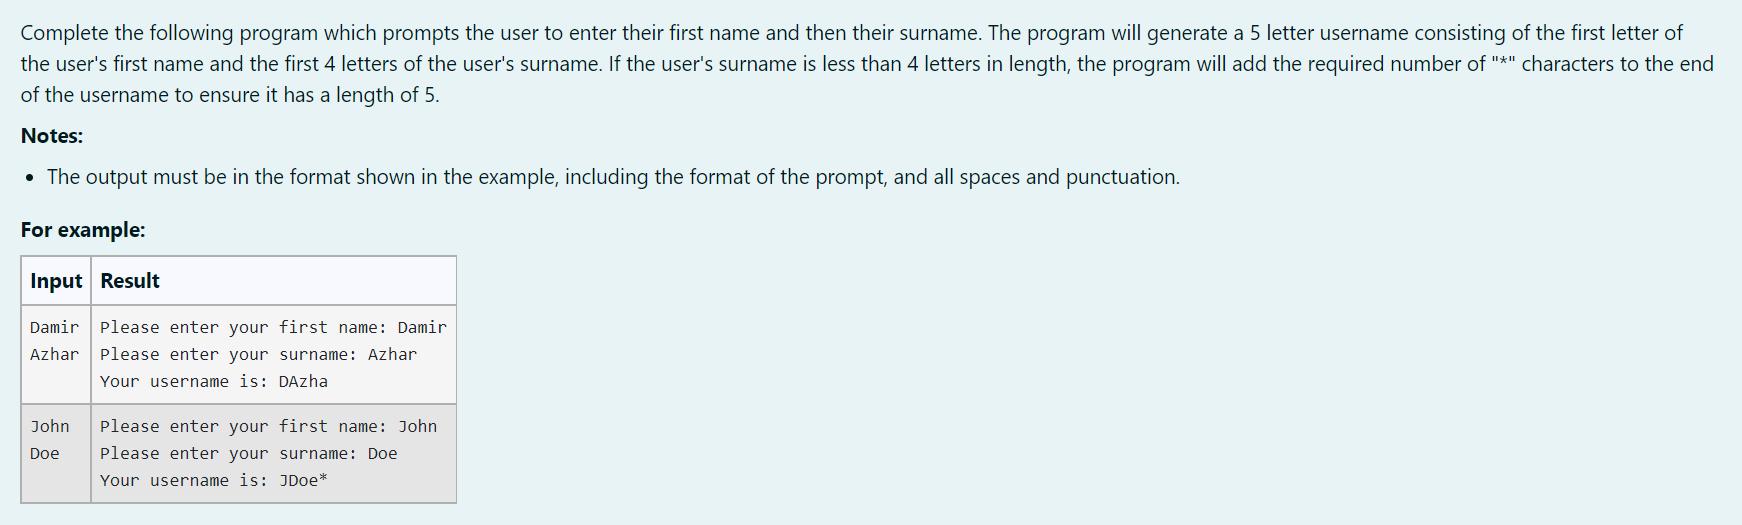 Complete the following program which prompts the user to enter their first name and then their surname. The